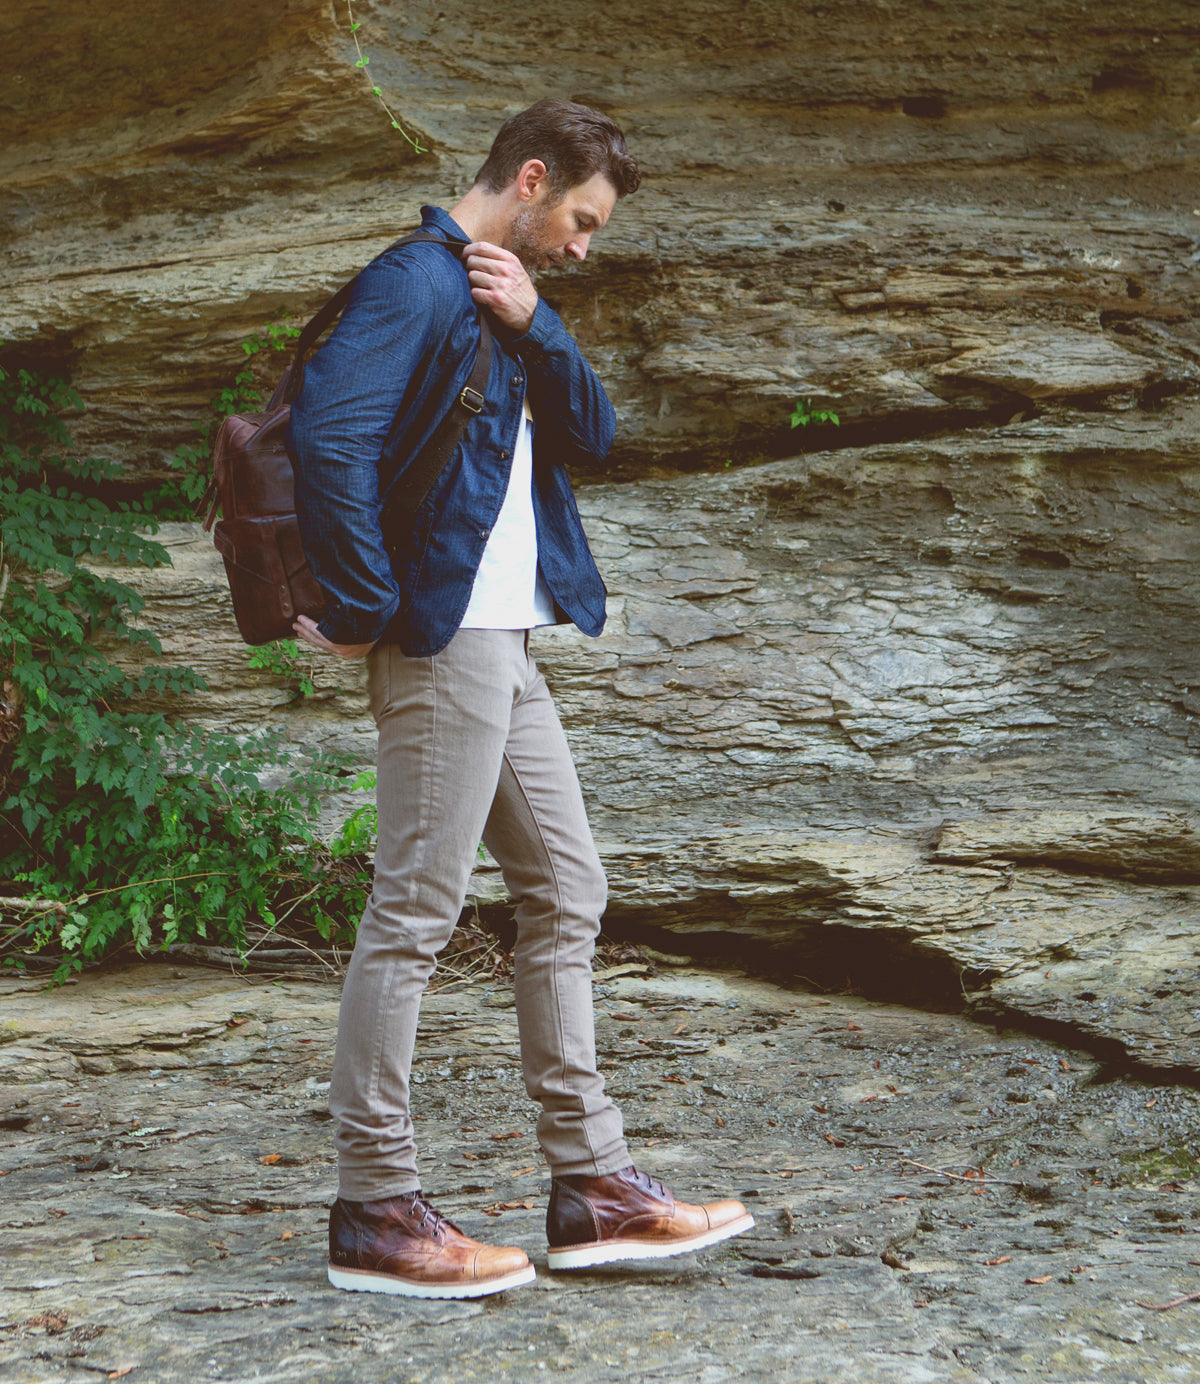 A man wearing a denim jacket, white shirt, beige pants, and Bed Stu men's leather boots stands thoughtfully on a rocky terrain, holding a Bed Stu leather bag.